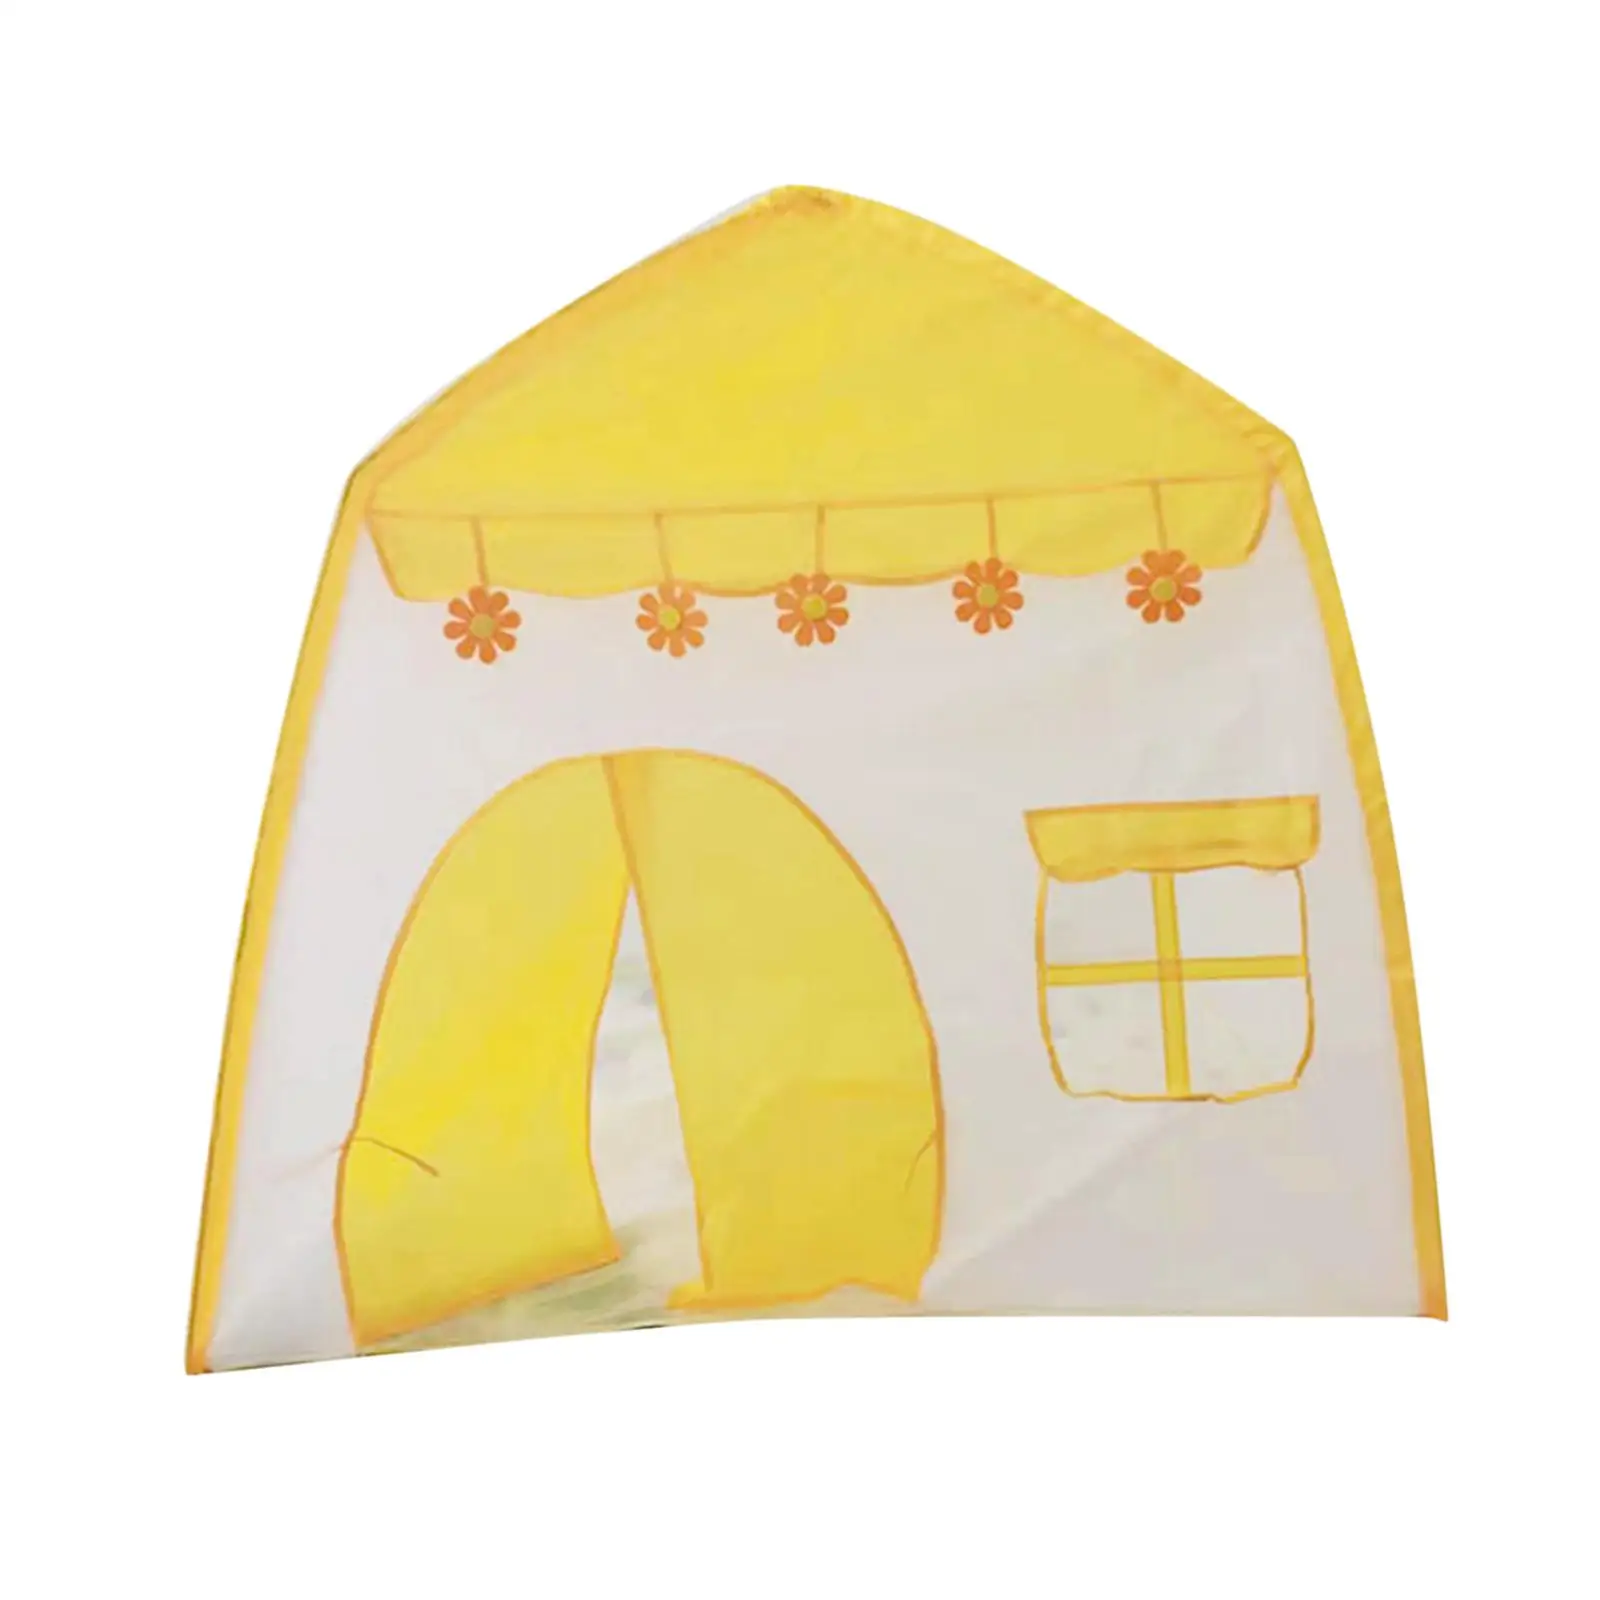 Cute Children Play Tent Fun Game Tent Multipurpose Outdoor Indoor Play Portable Role Play Game for Park Camping Outdoor Indoor